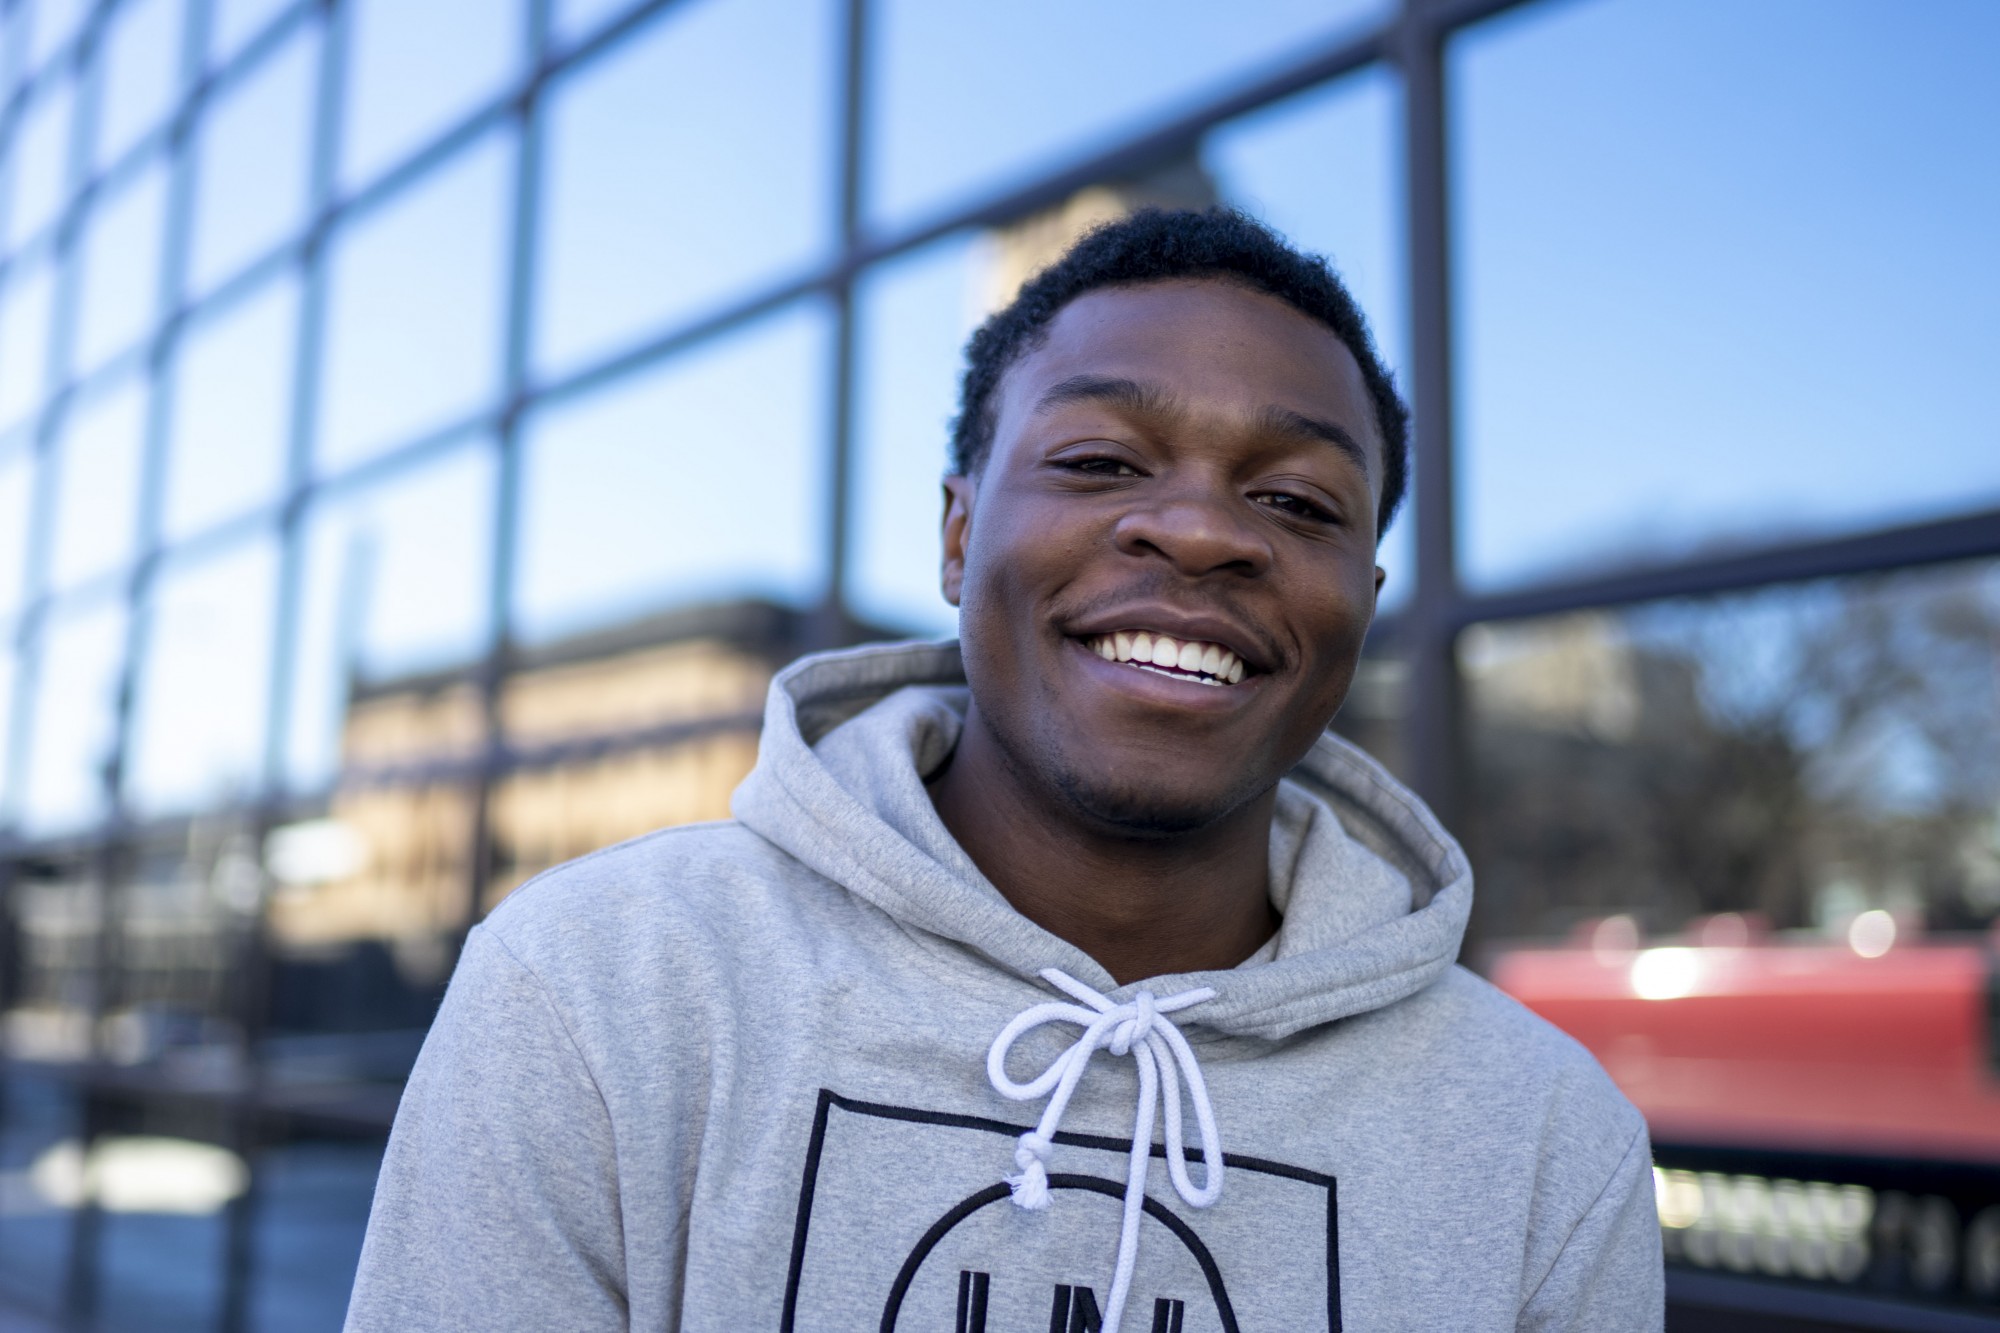 Bayo Idowu poses for a portrait in downtown Minneapolis on Sunday, Feb. 23. Idowu says “Call me selfish but I want it to be everywhere. It’s not about me, it’s about the message.”